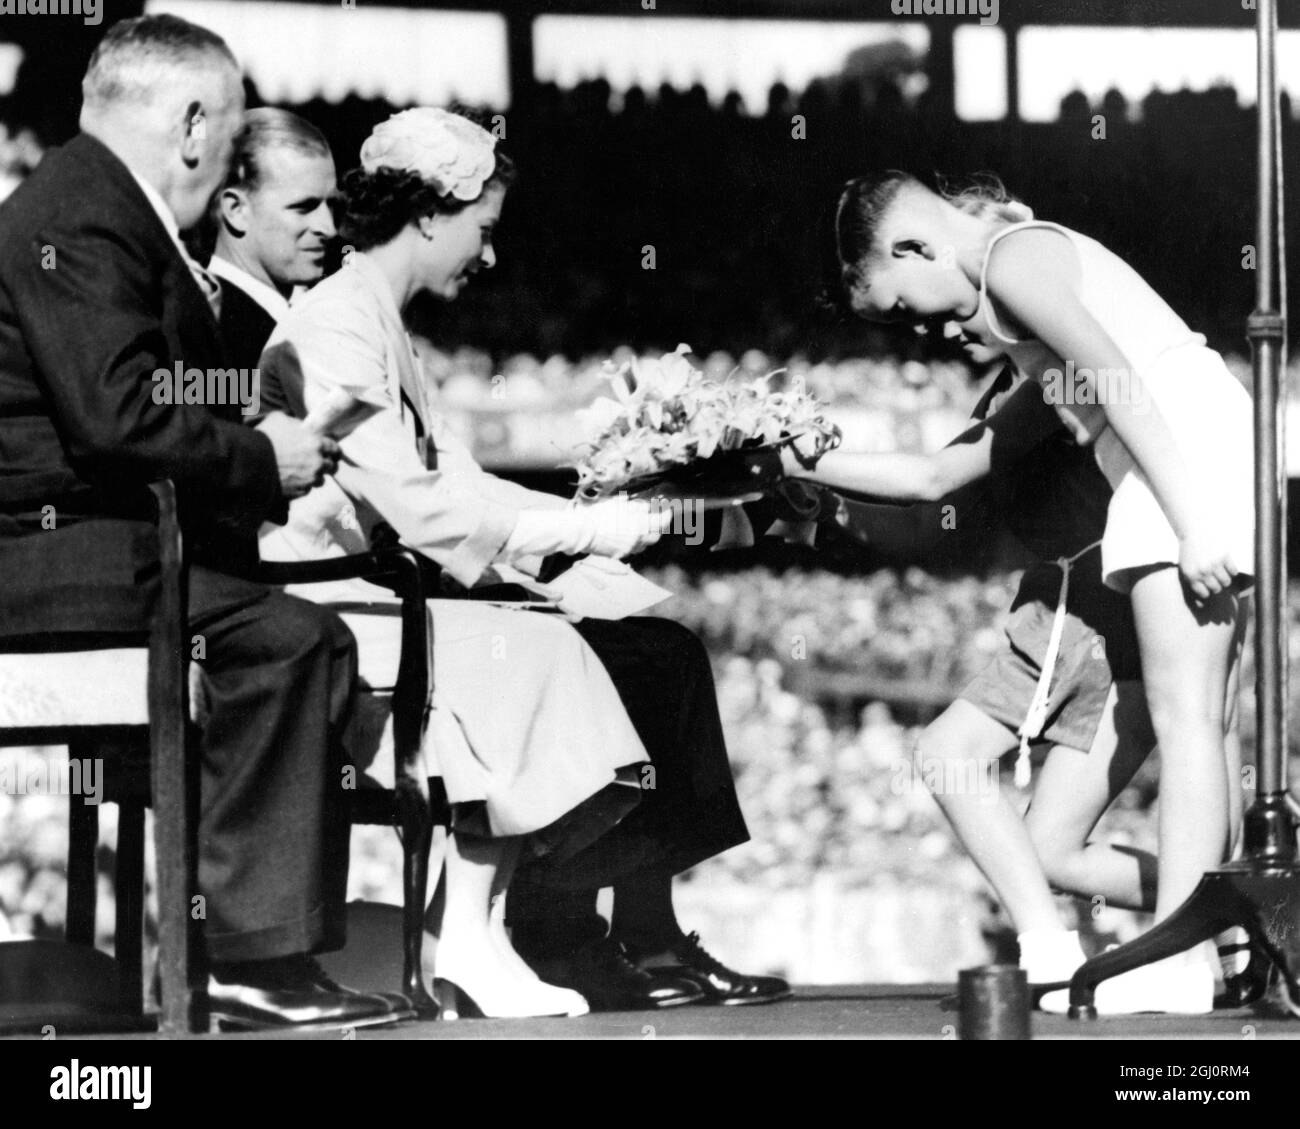 ROYAL AUSTRALIAN TOUR QUEEN RECEIVES A POSY IN MELBOURNE. THE QUEEN accepts a posy from BEVERLEY EMSLEY (10) and TREVOR REES (8) at gathering of ex-servicemen and women at the Melbourne Cricket Ground. On left is RSL State President N.D. WILSON. 3 March 1954 Stock Photo